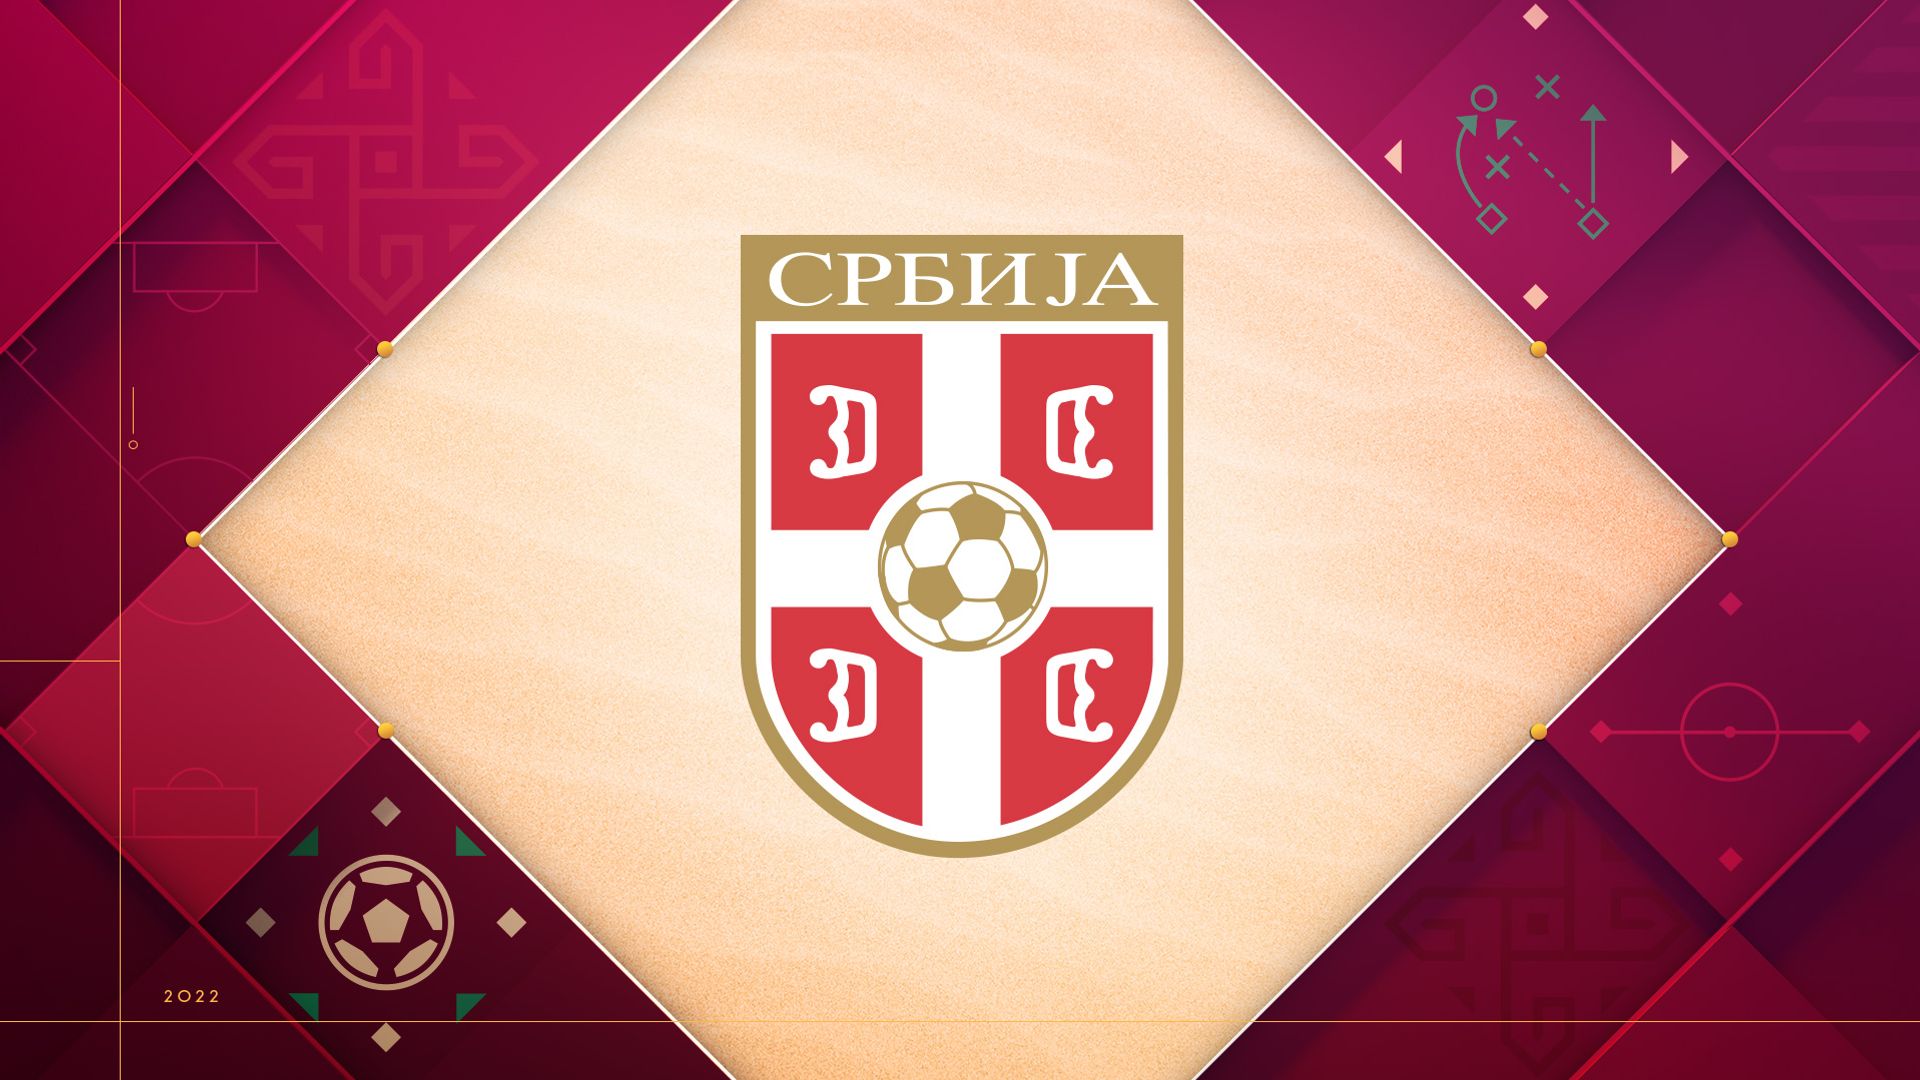 World Cup team guide: Serbia